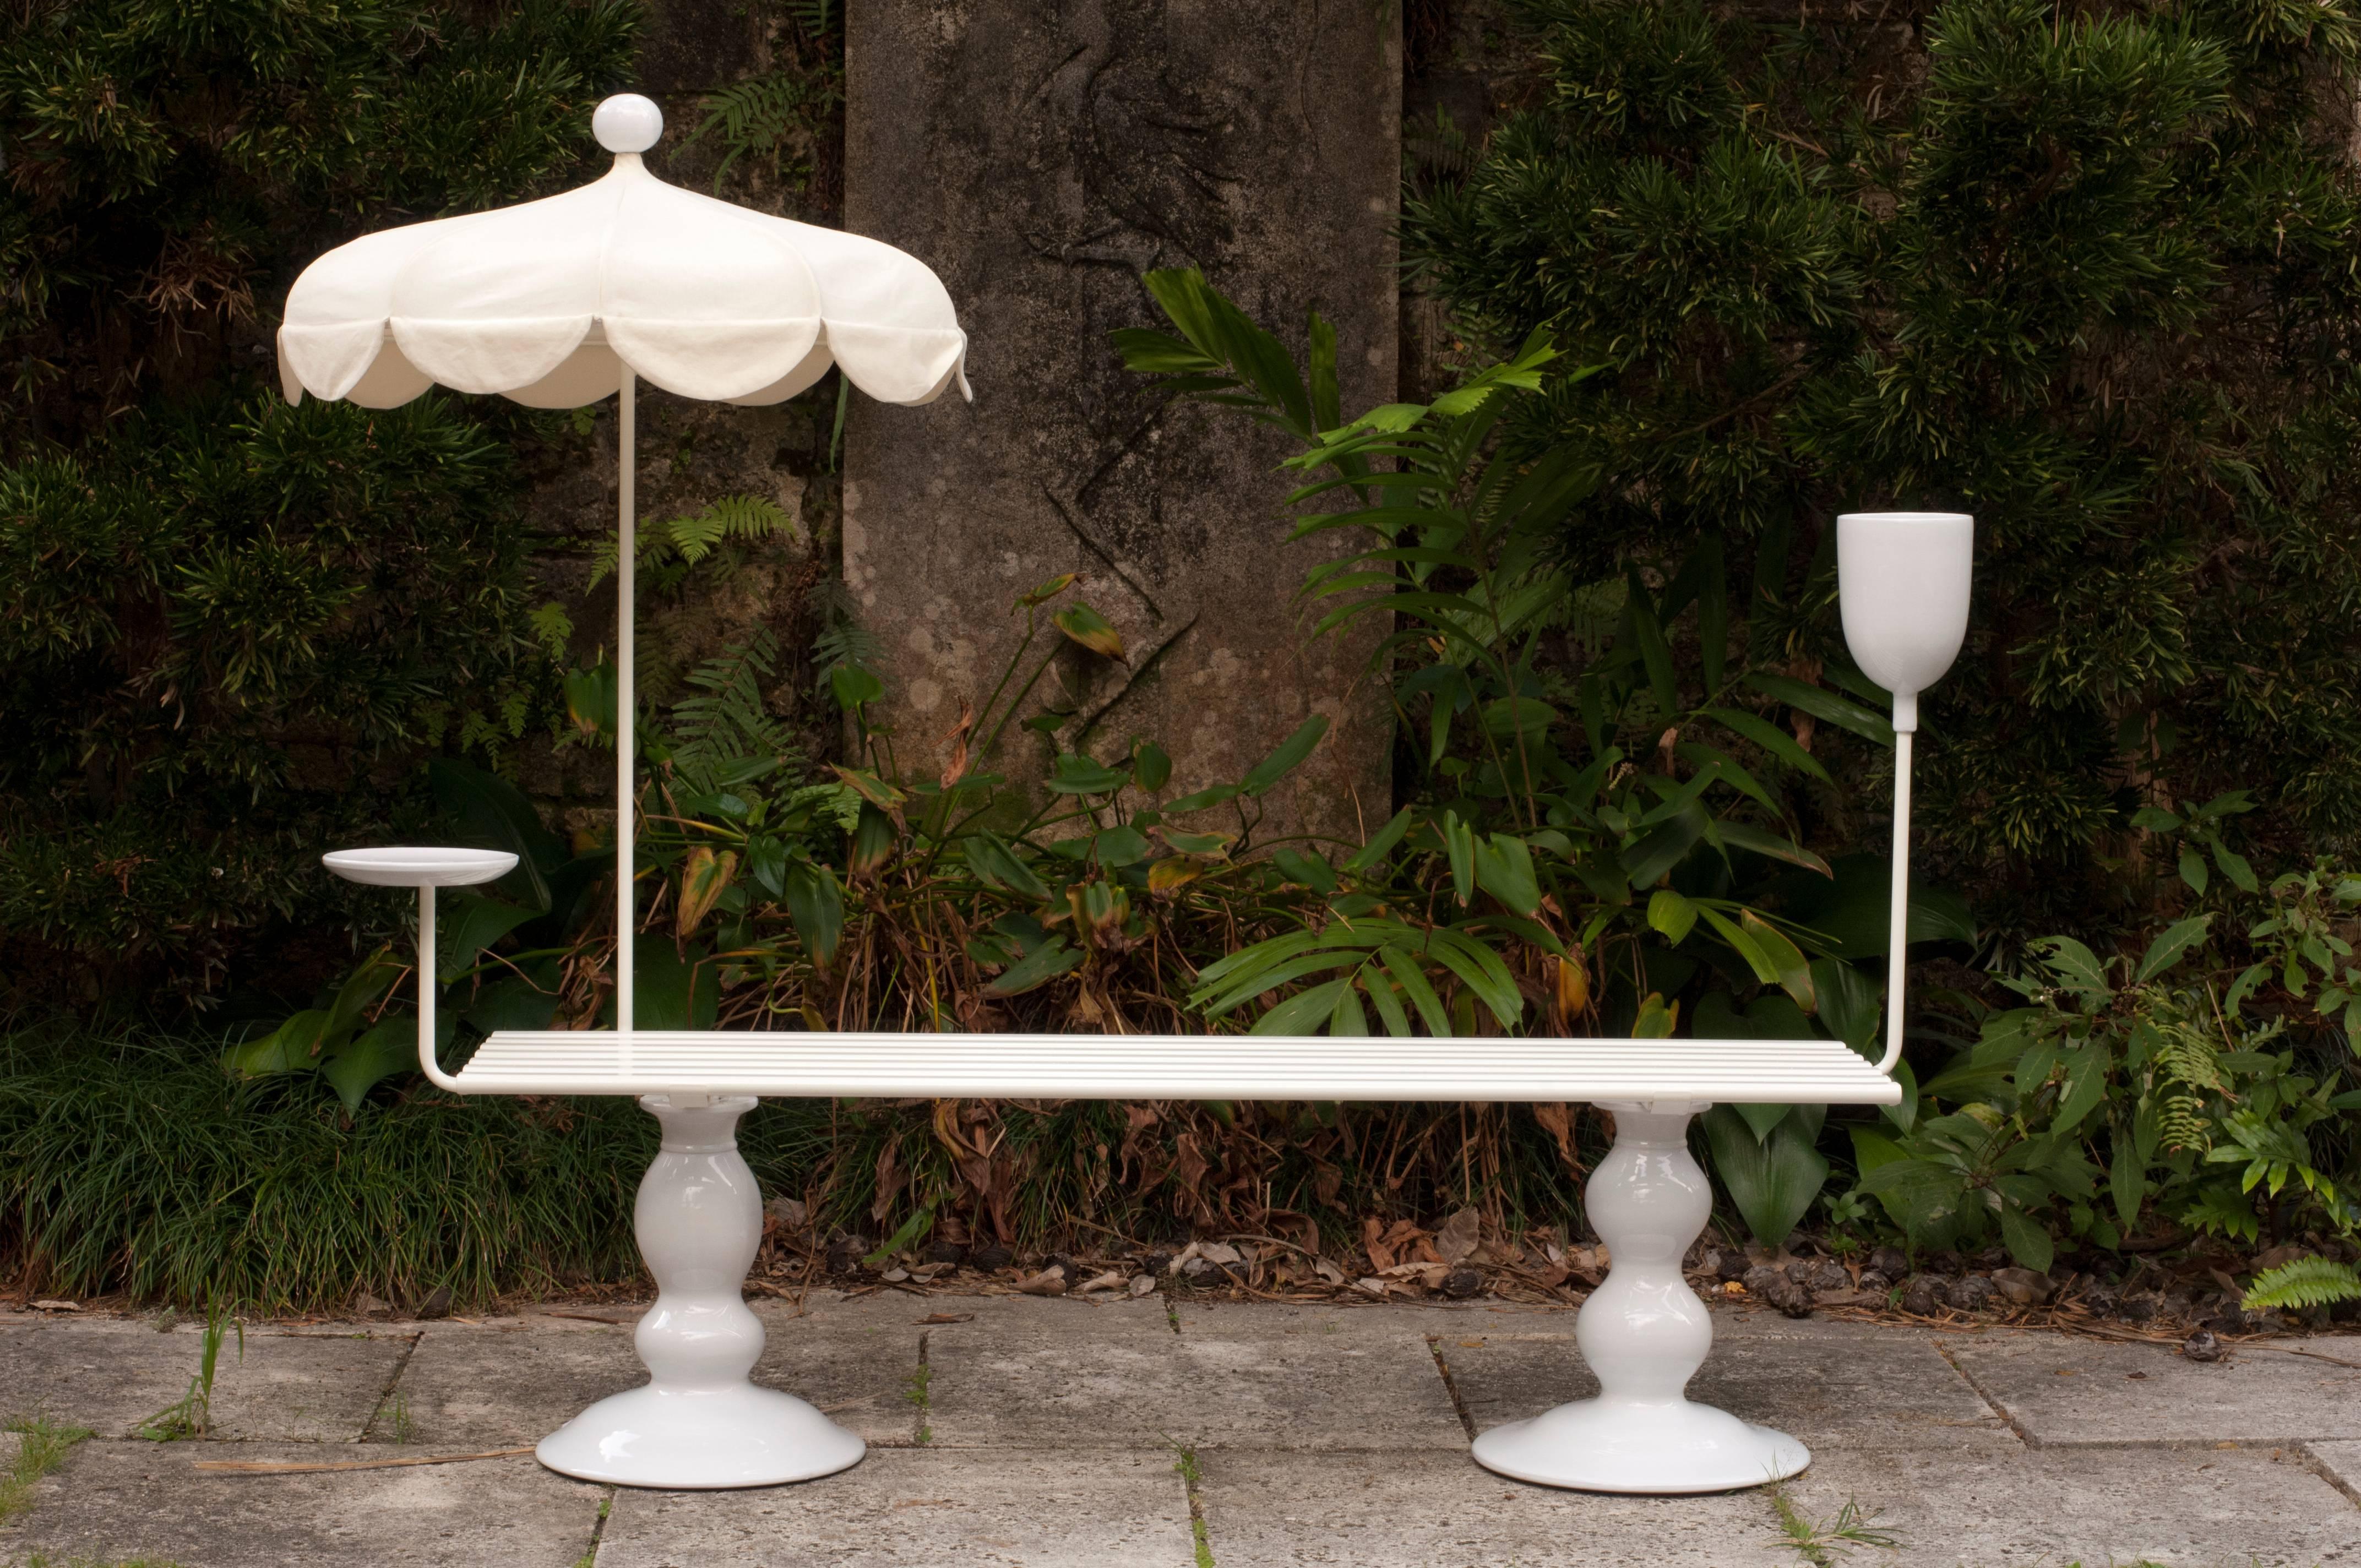 This playful, whimsical outdoor bench was created in 2012 by French designer Sam Baron for the Fairchild Tropical Botanic Garden's inaugural exhibition of Design at Fairchild: Sitting Naturally. 

Made of white lacquered wood strips, metal and